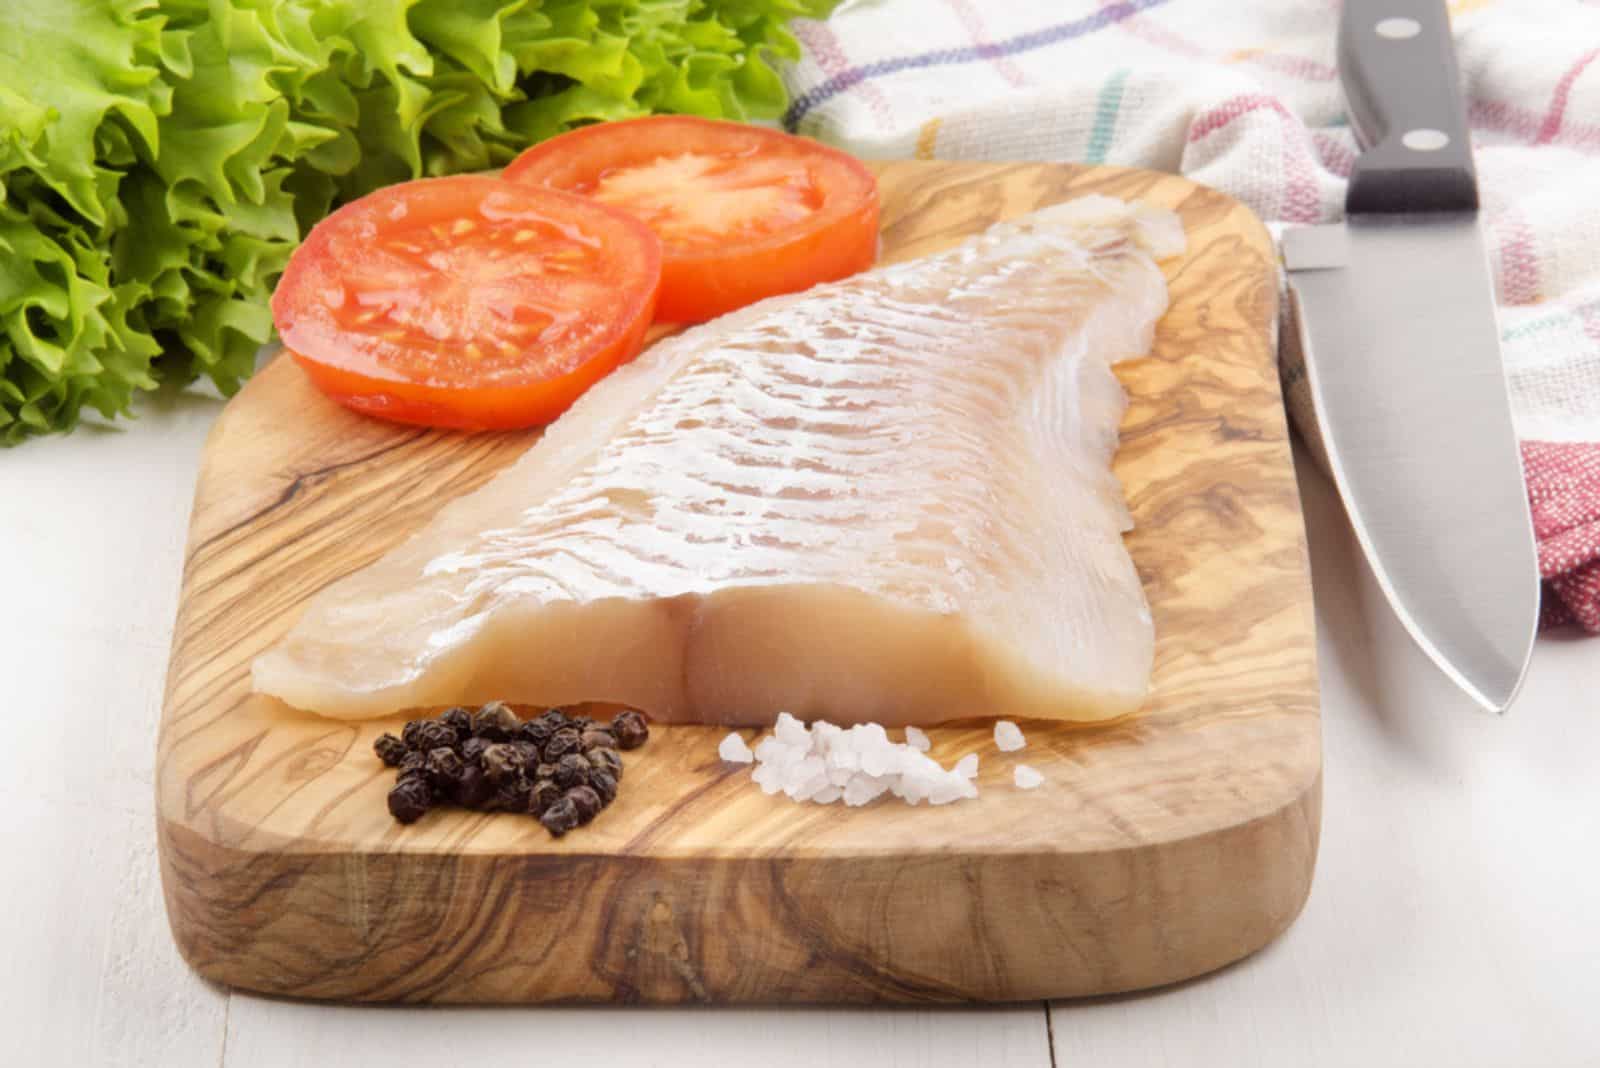 haddock fillet with tomato, pepper and coarse salt on a wooden board
